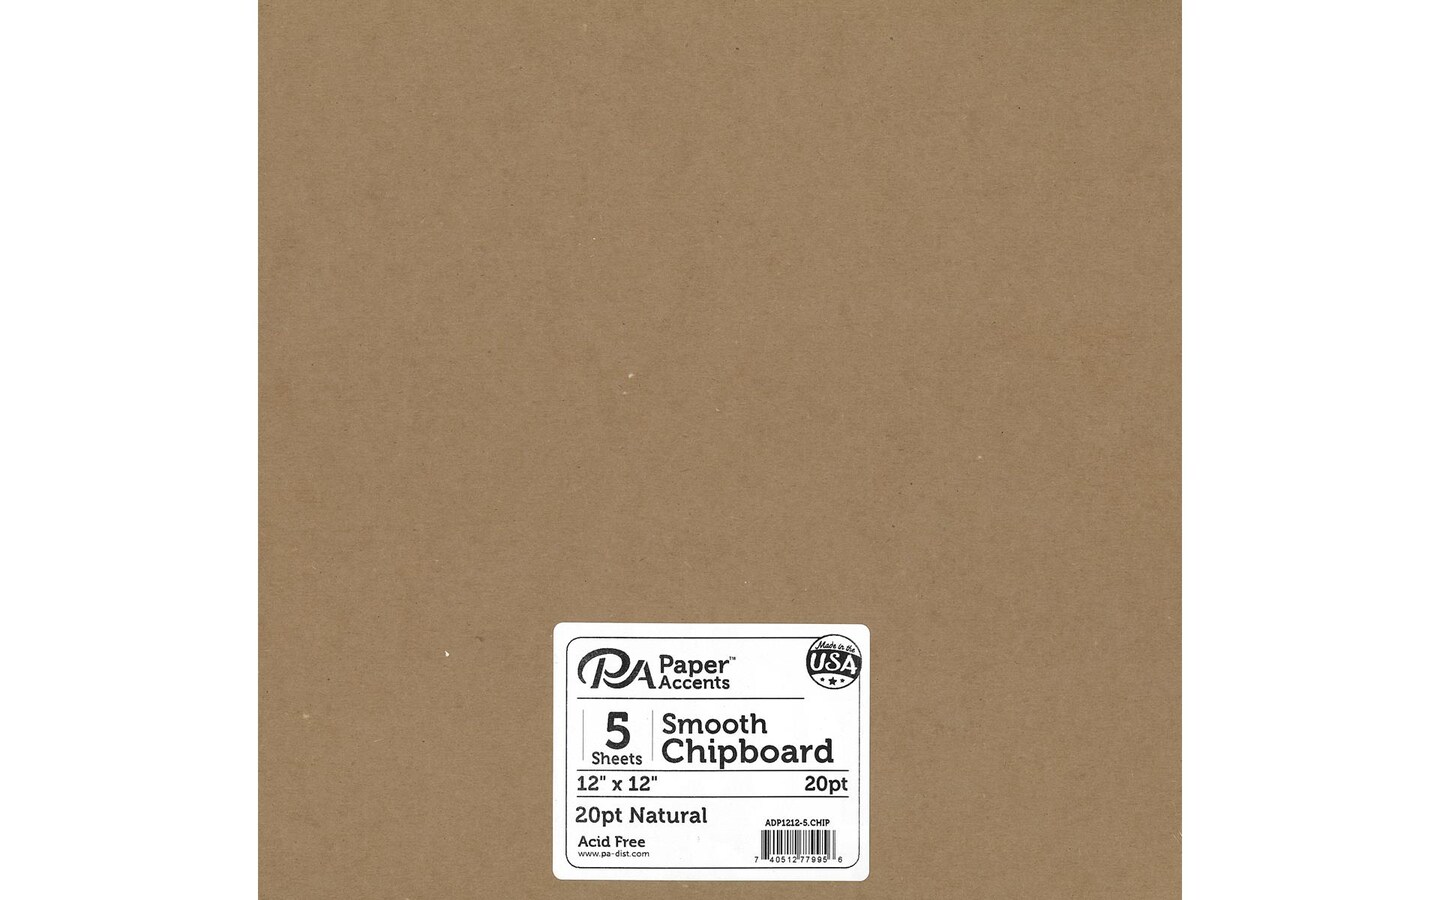 Chipboard 12x12 20pt Natural 5pc